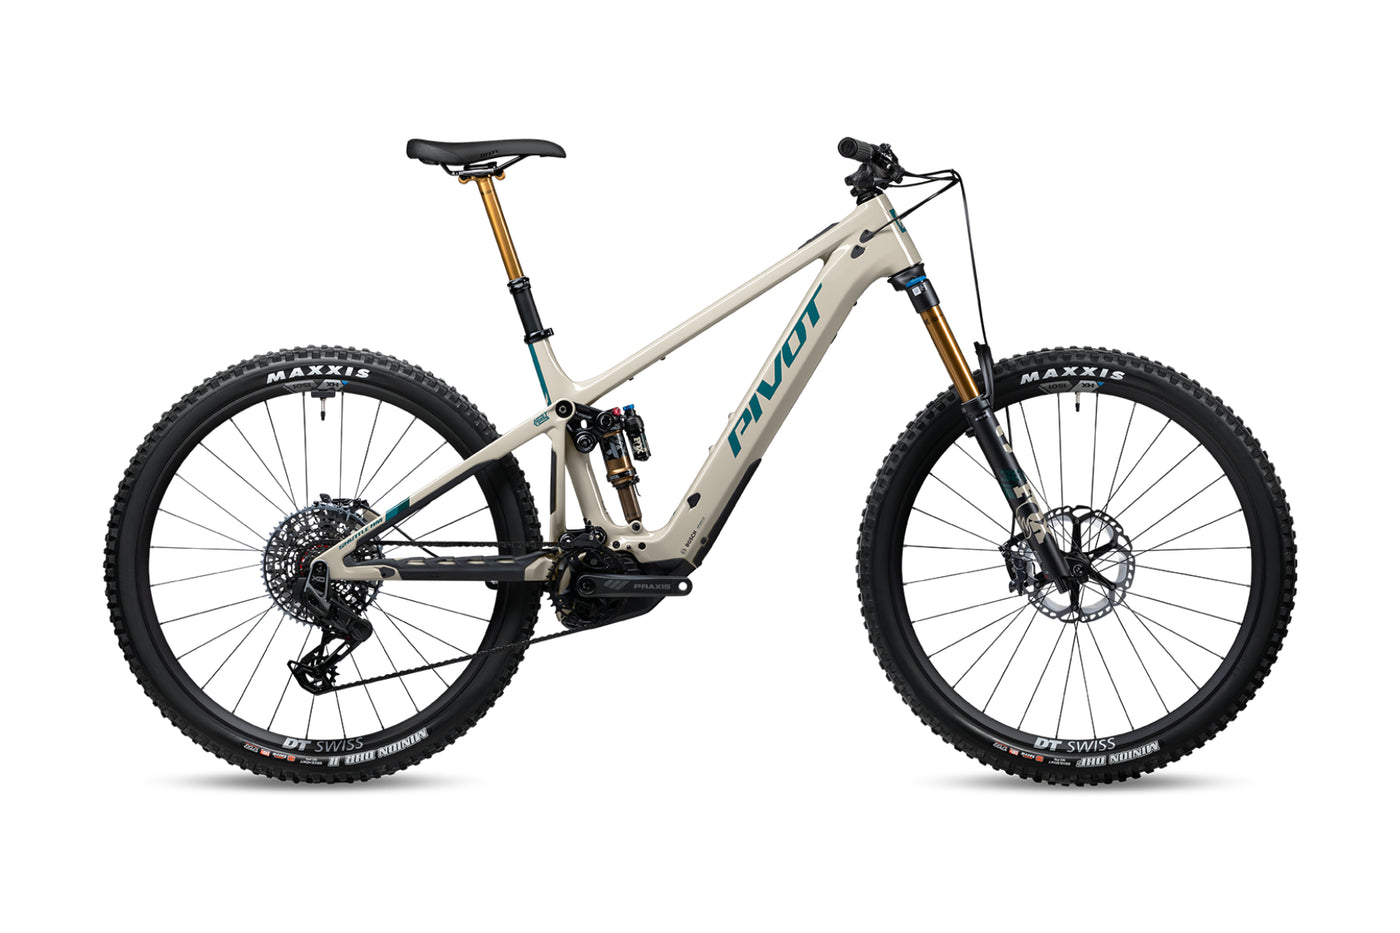 Shuttle AM Pro X0 AXS Transmission - Mojave Willow